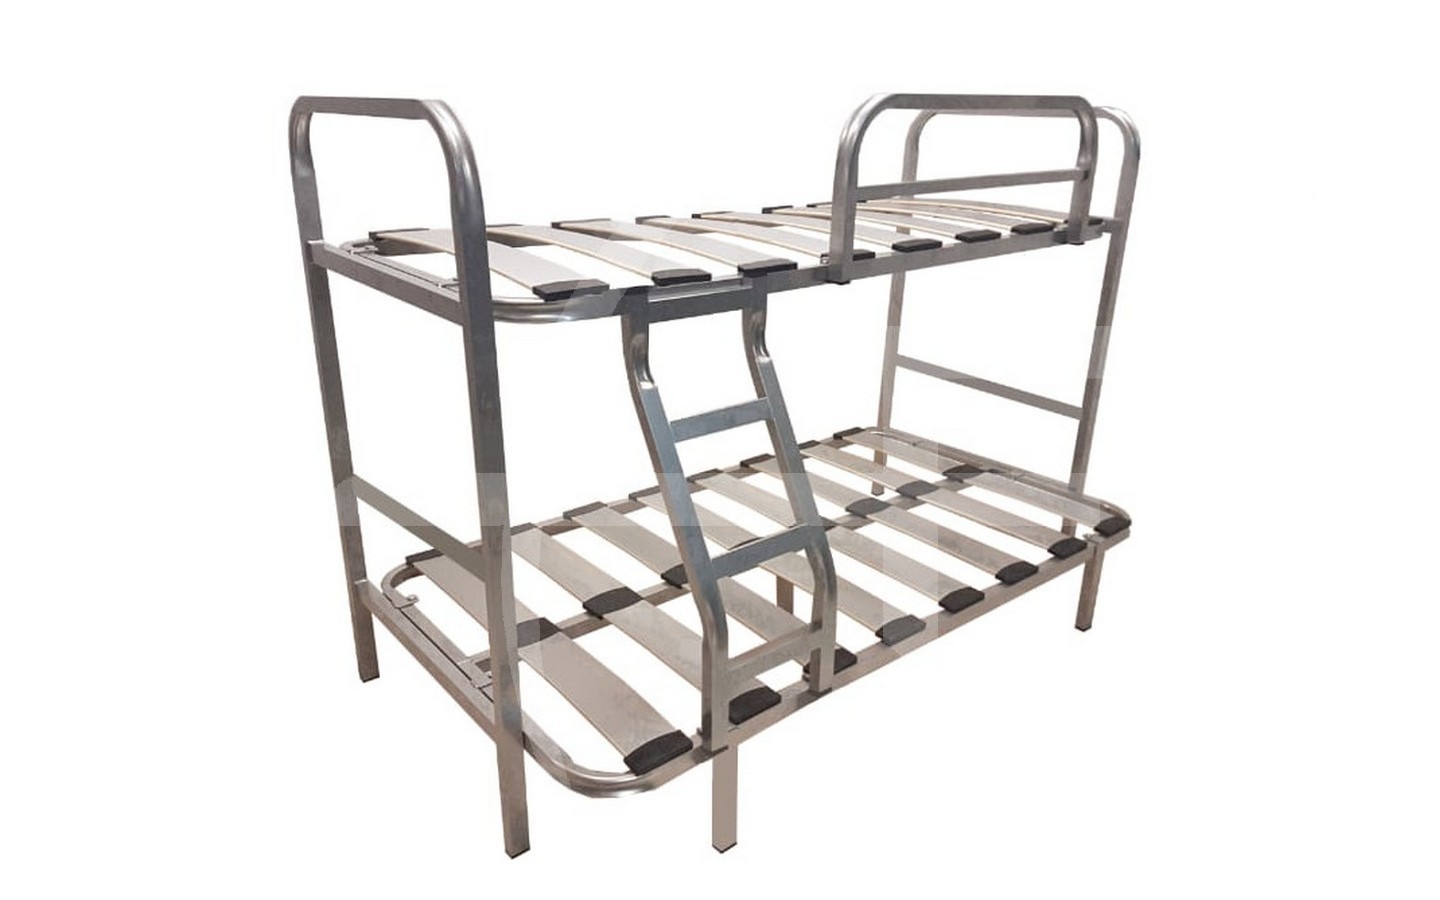 Bunk Beds For S Steel, Metal Bunk Beds With Mattresses